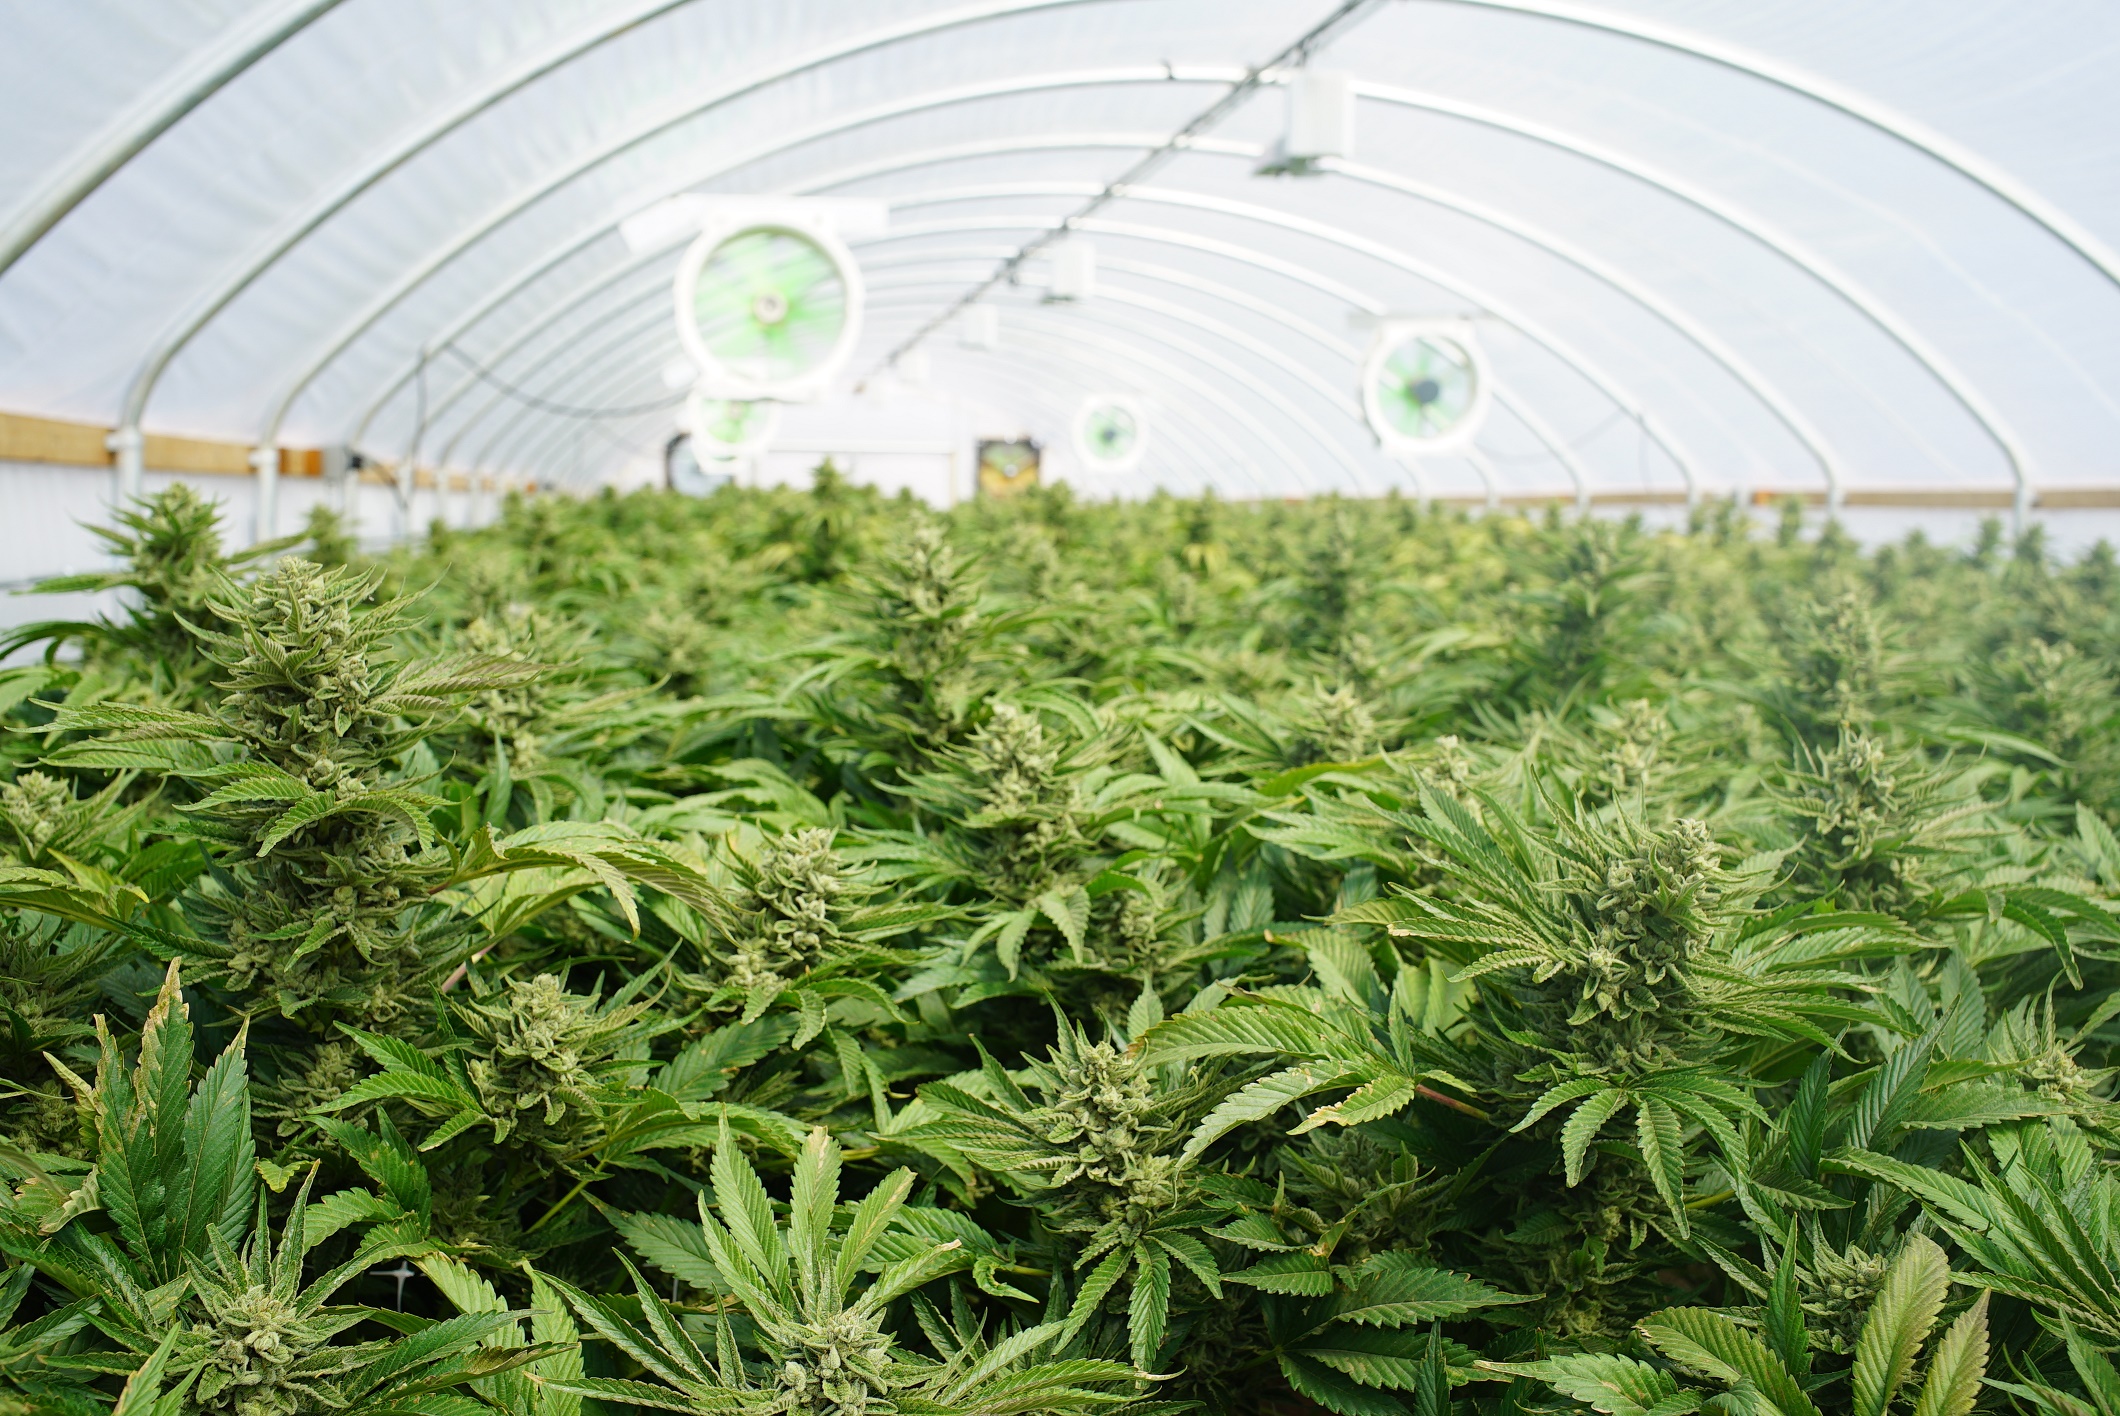 For Thurs. Cannabis Investors: Should Aphria Inc. (TSX:APHA) or Aurora Cannabis Inc. (TSX:ACB) Stock Be in Your Portfolio?